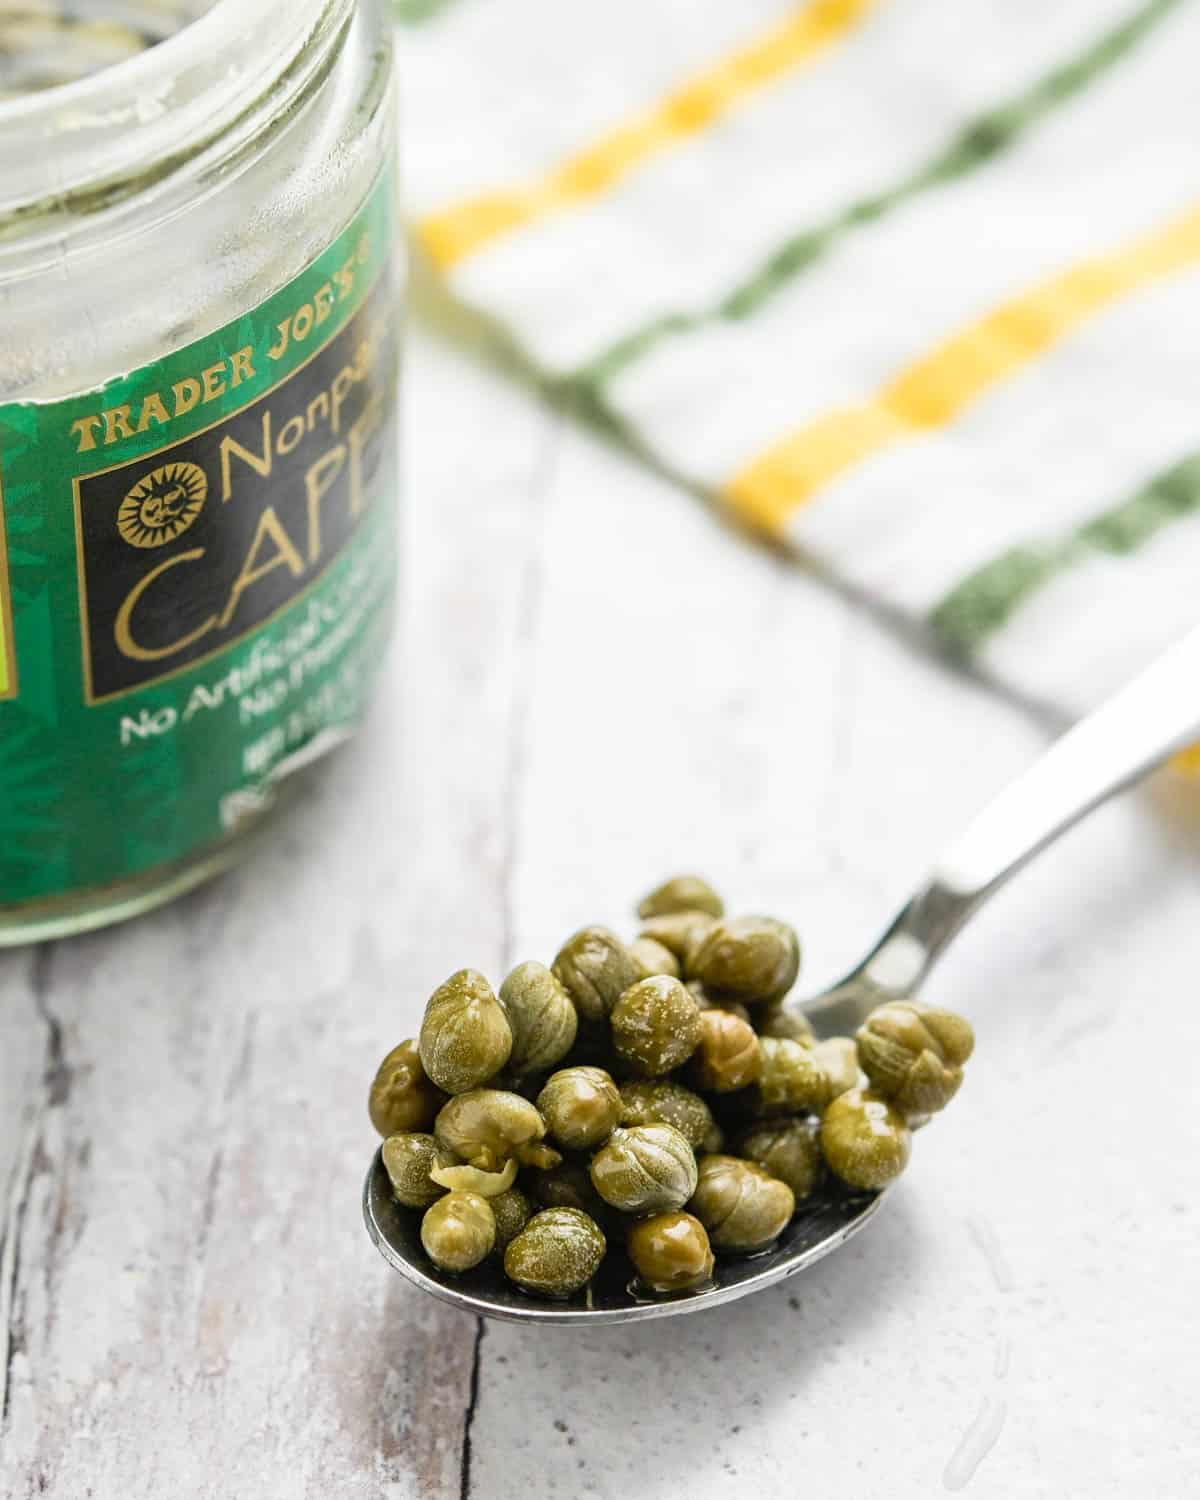 A spoonful of capers.